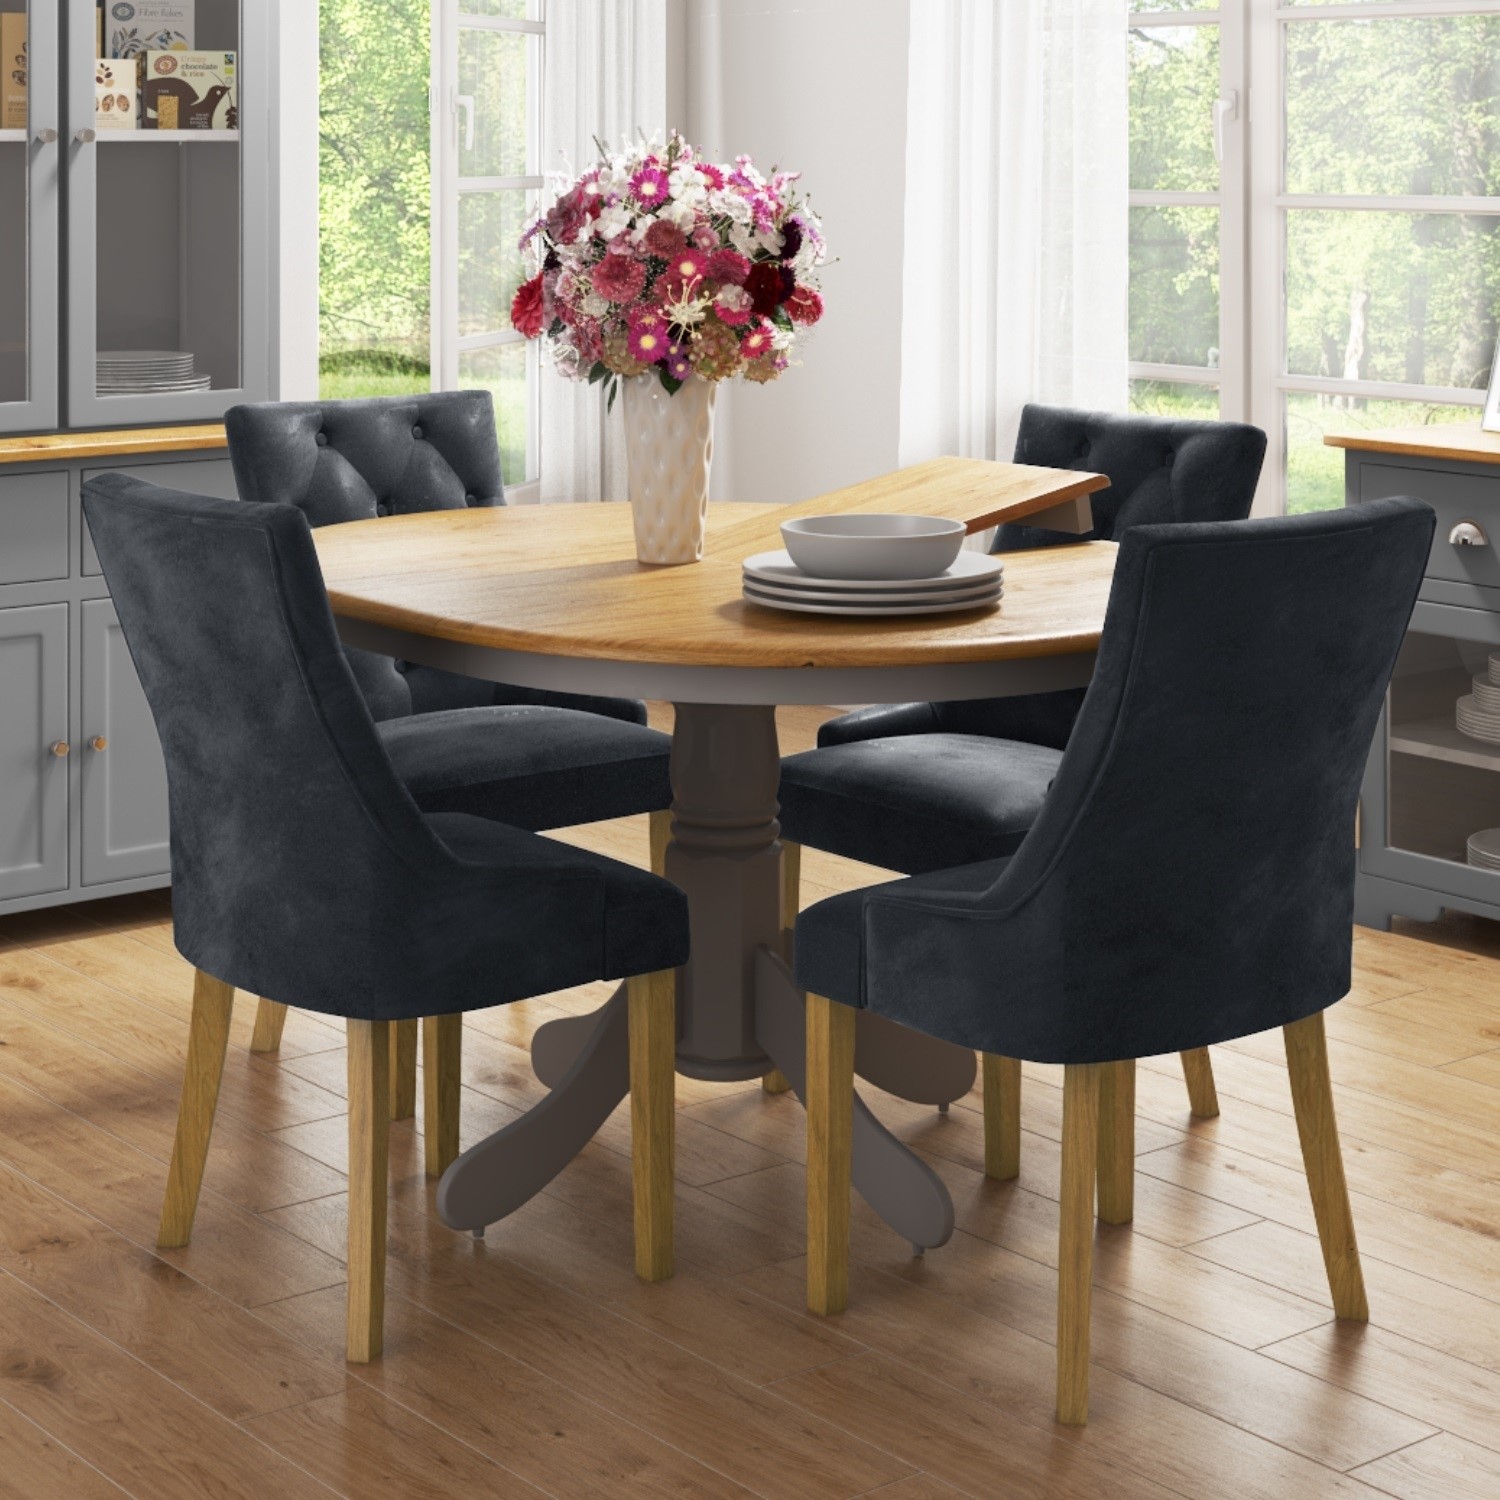 Round Extendable Dining Table With 4, Round Dining Table And Chairs For 4 Ireland